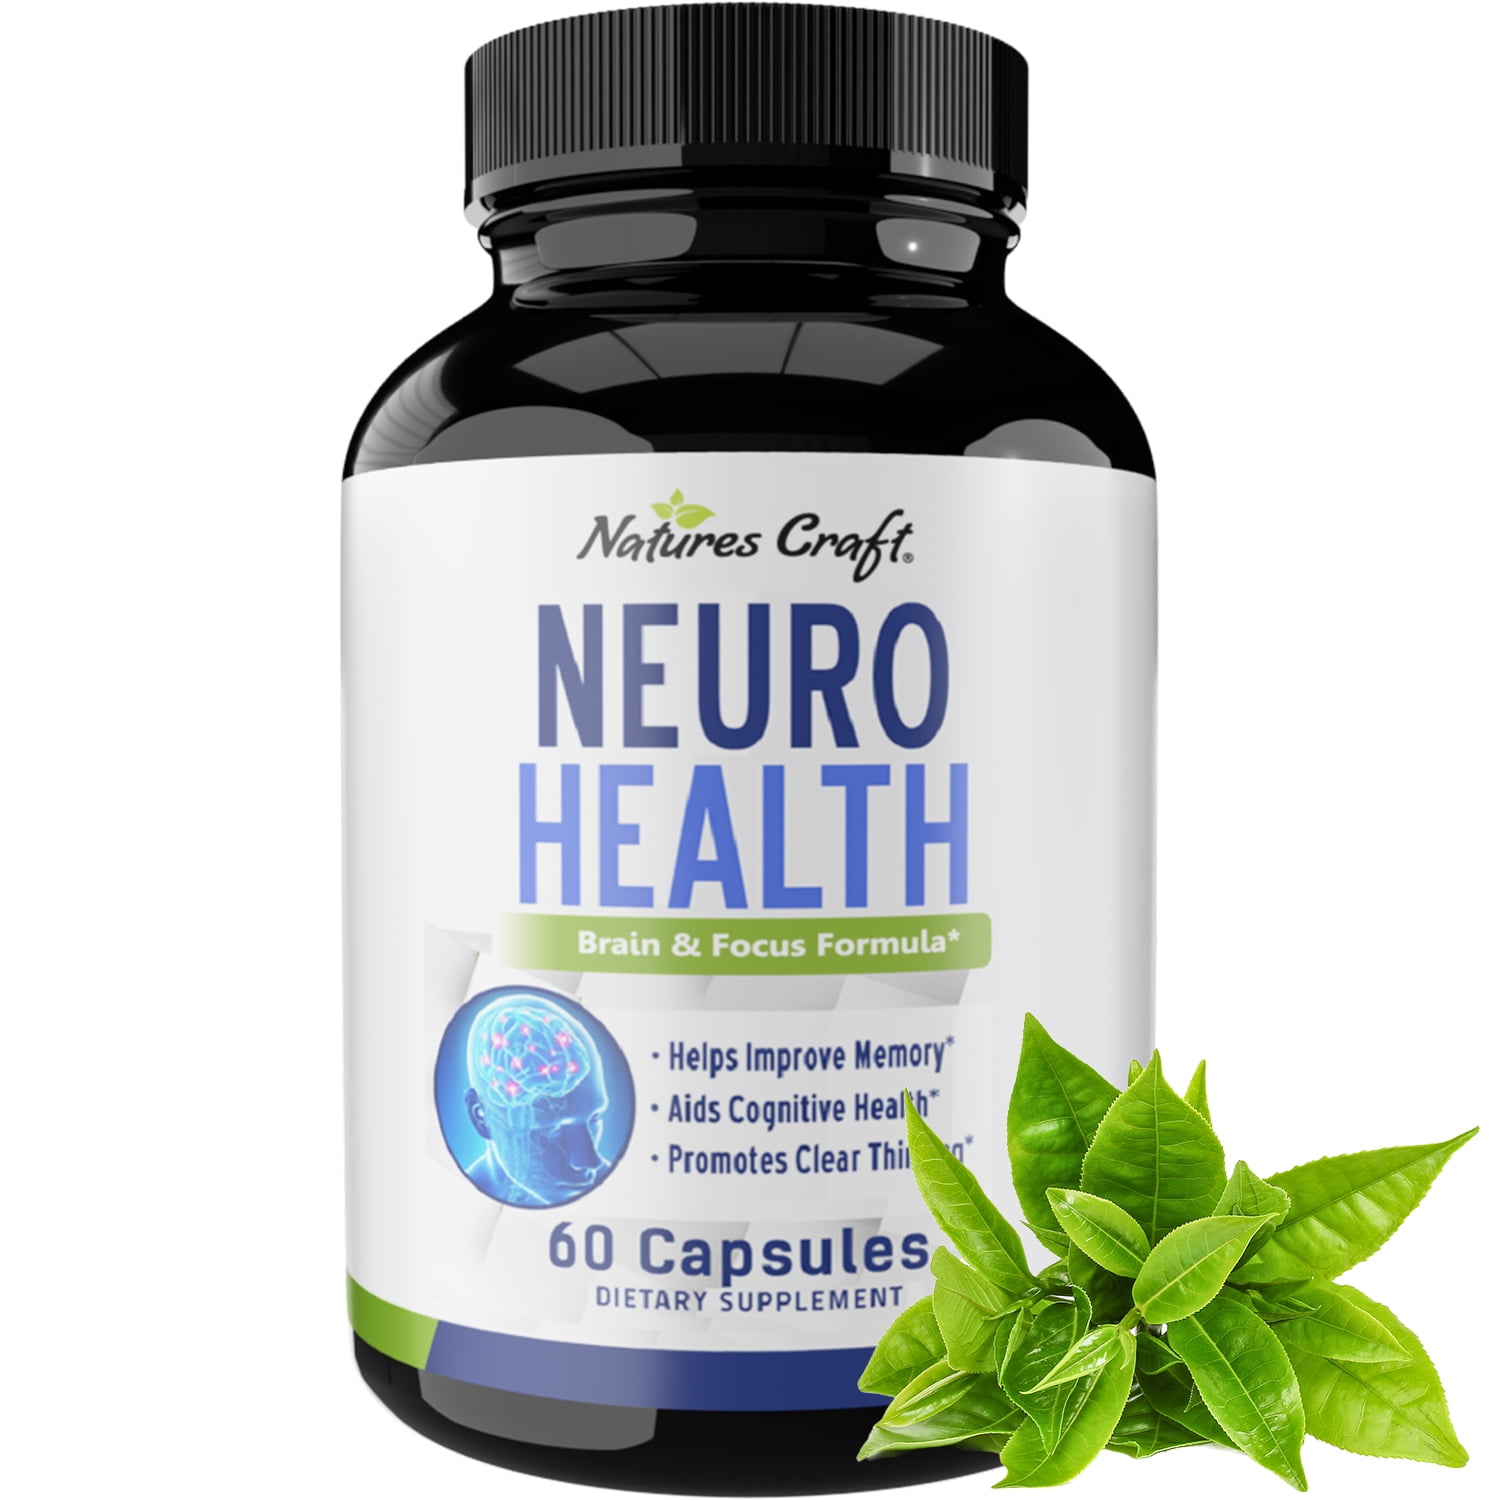 Brain and cognitive health supplements